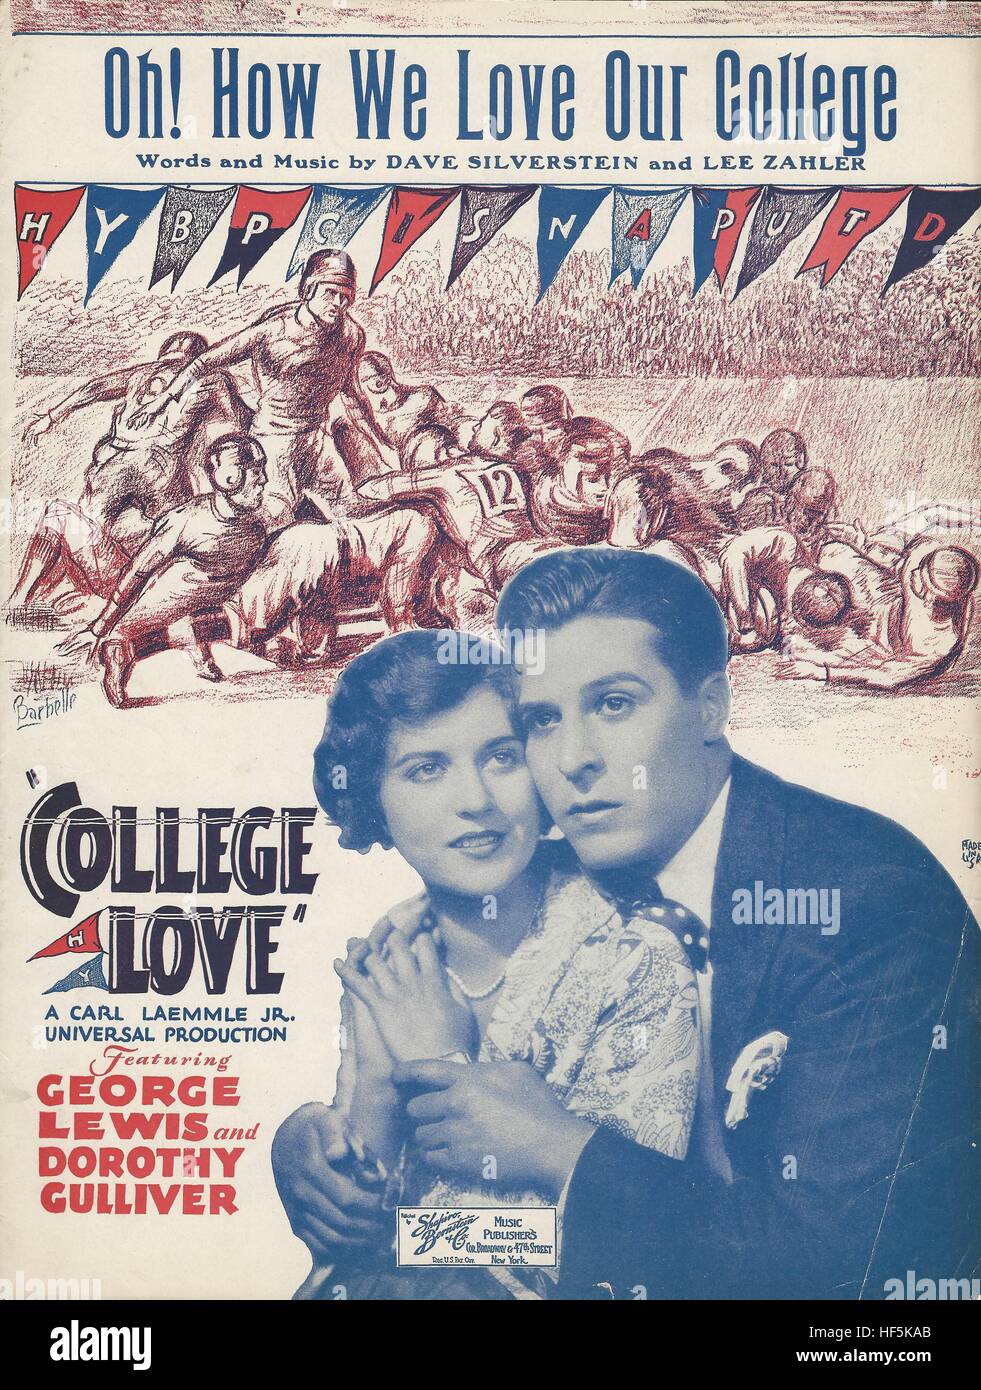 'Oh! How We Love Our College' from 1929 movie 'College Love' Sheet Music Cover Stock Photo